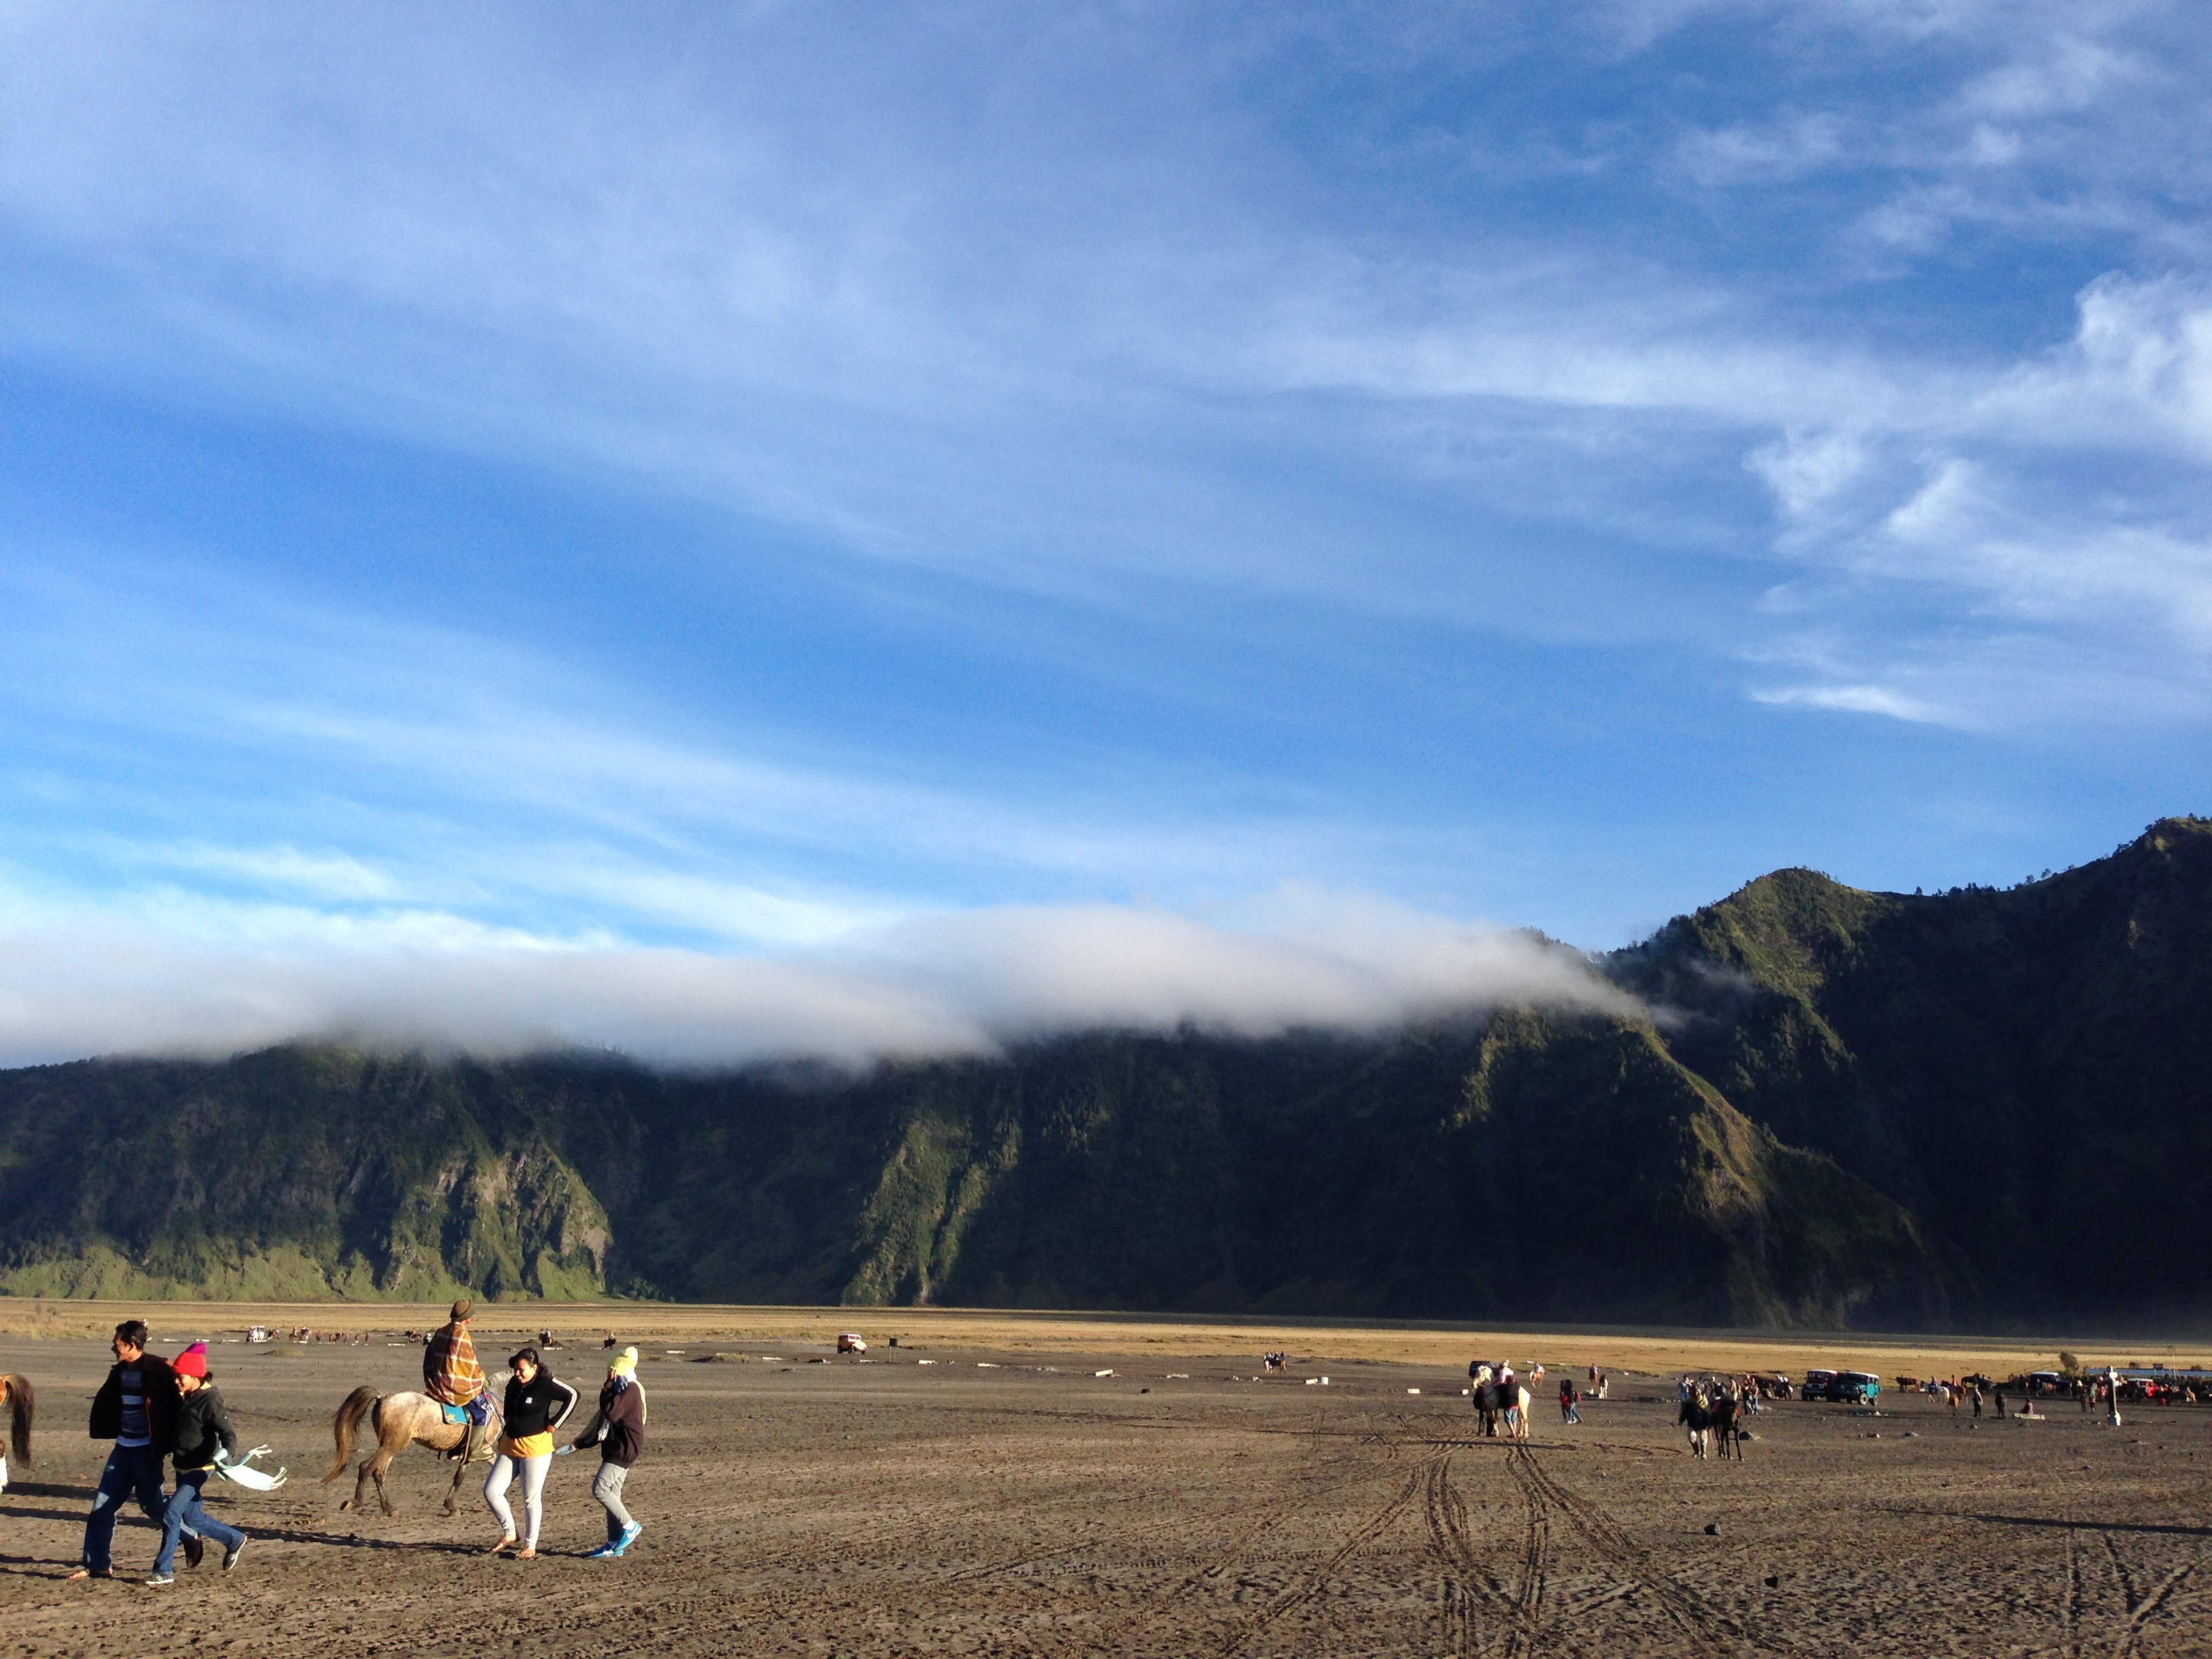 Greenery in the distance at mount bromo